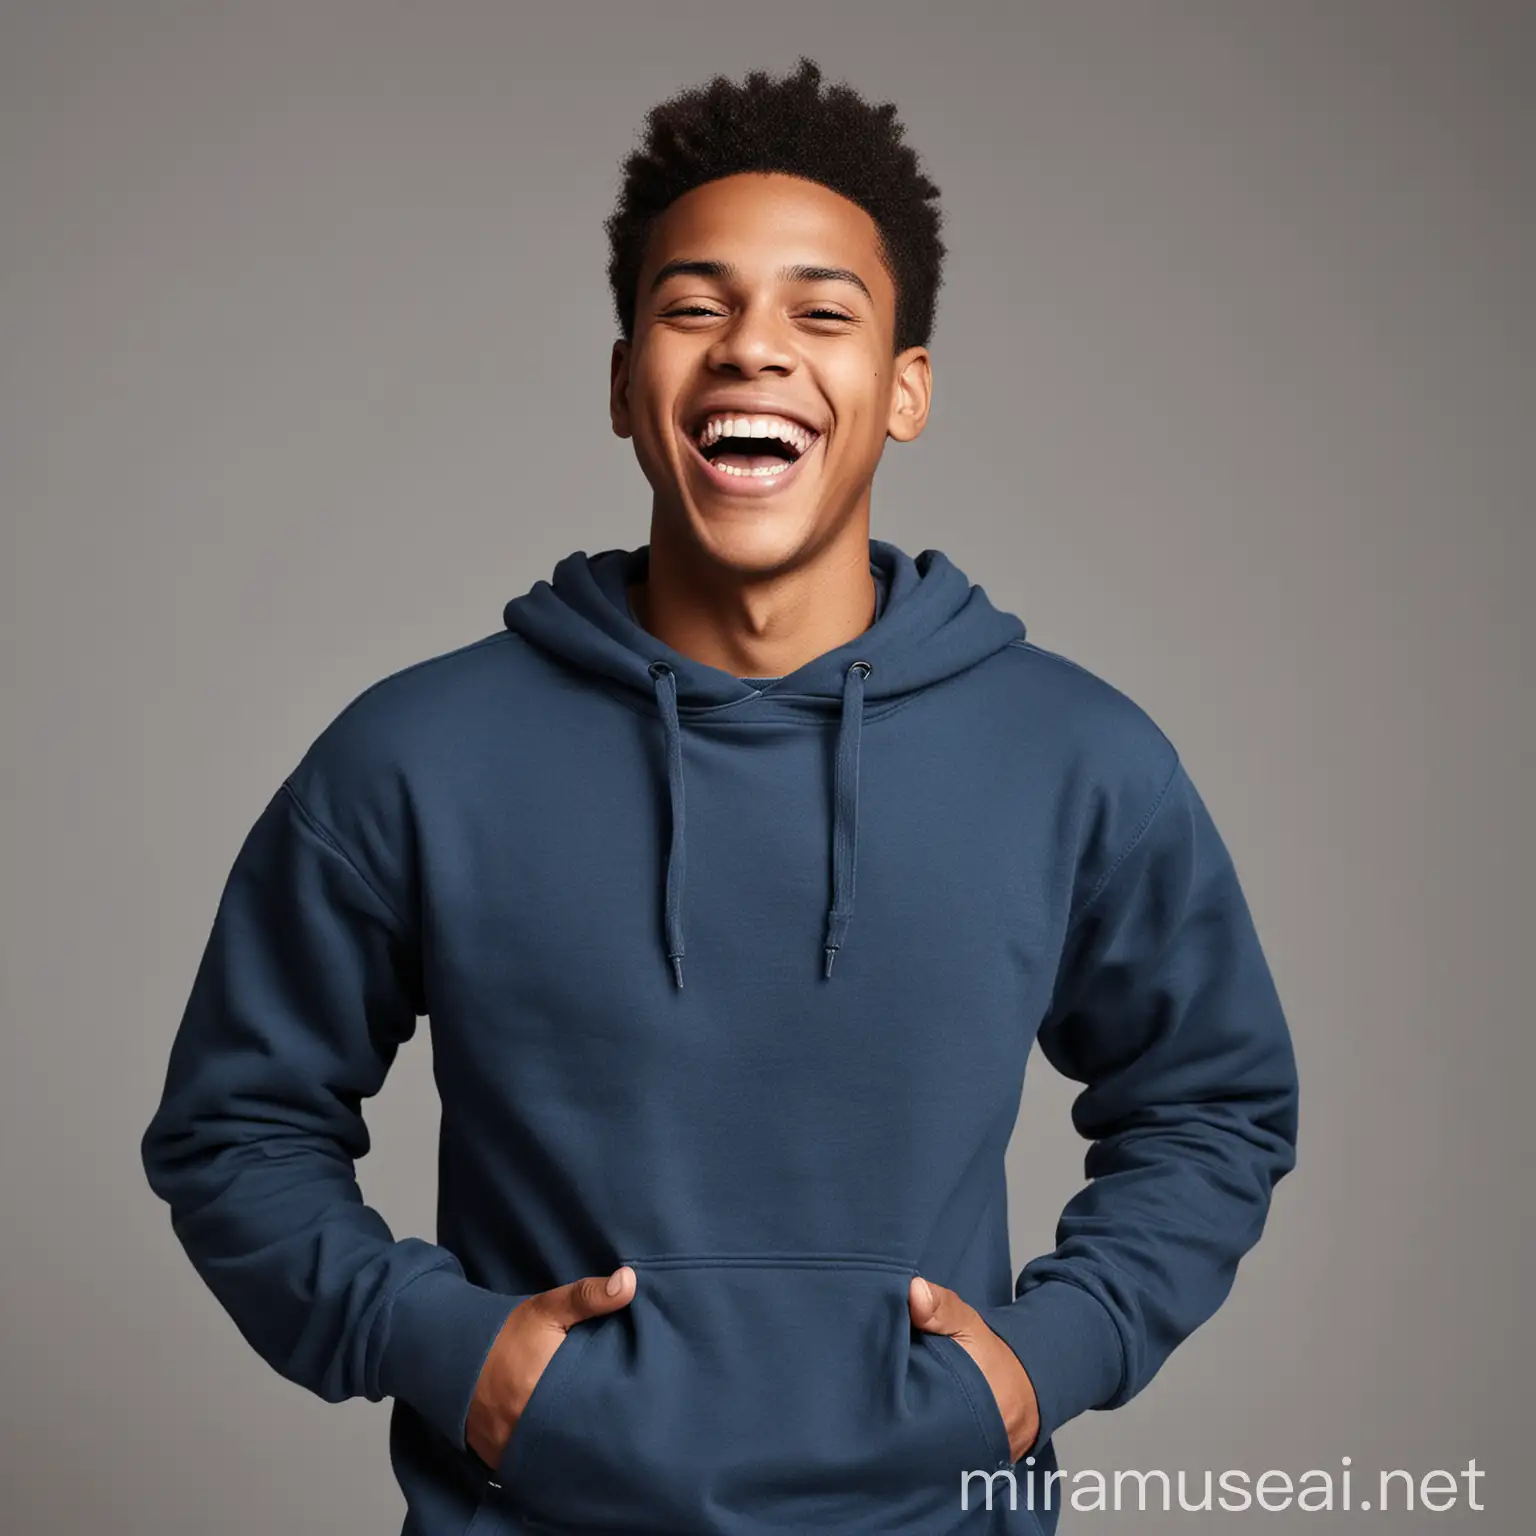 Cheerful African American young man , putting on blue sweatshirt , laughing , facing camera , posing with hands in pockets against gray space